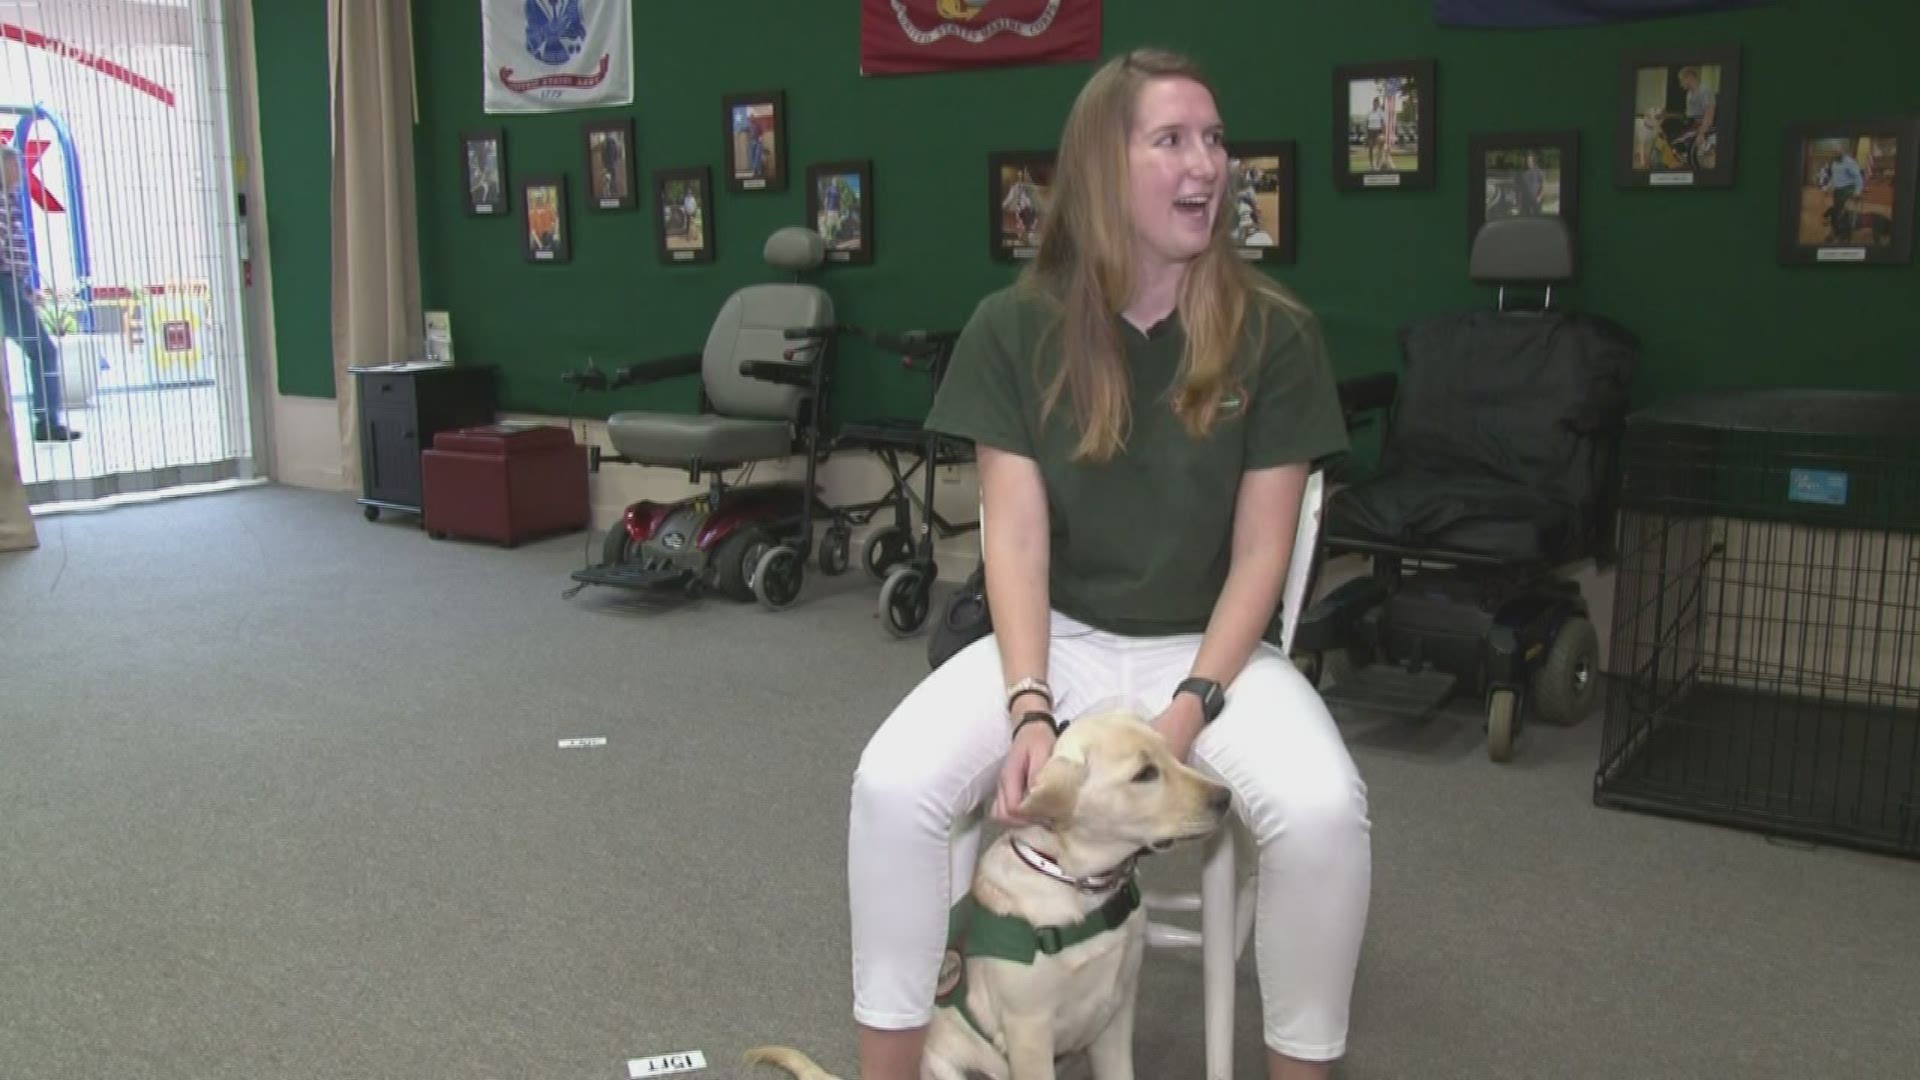 "She is very passionate about service dogs and about educating the public about service dogs," Heather Wilkerson said.